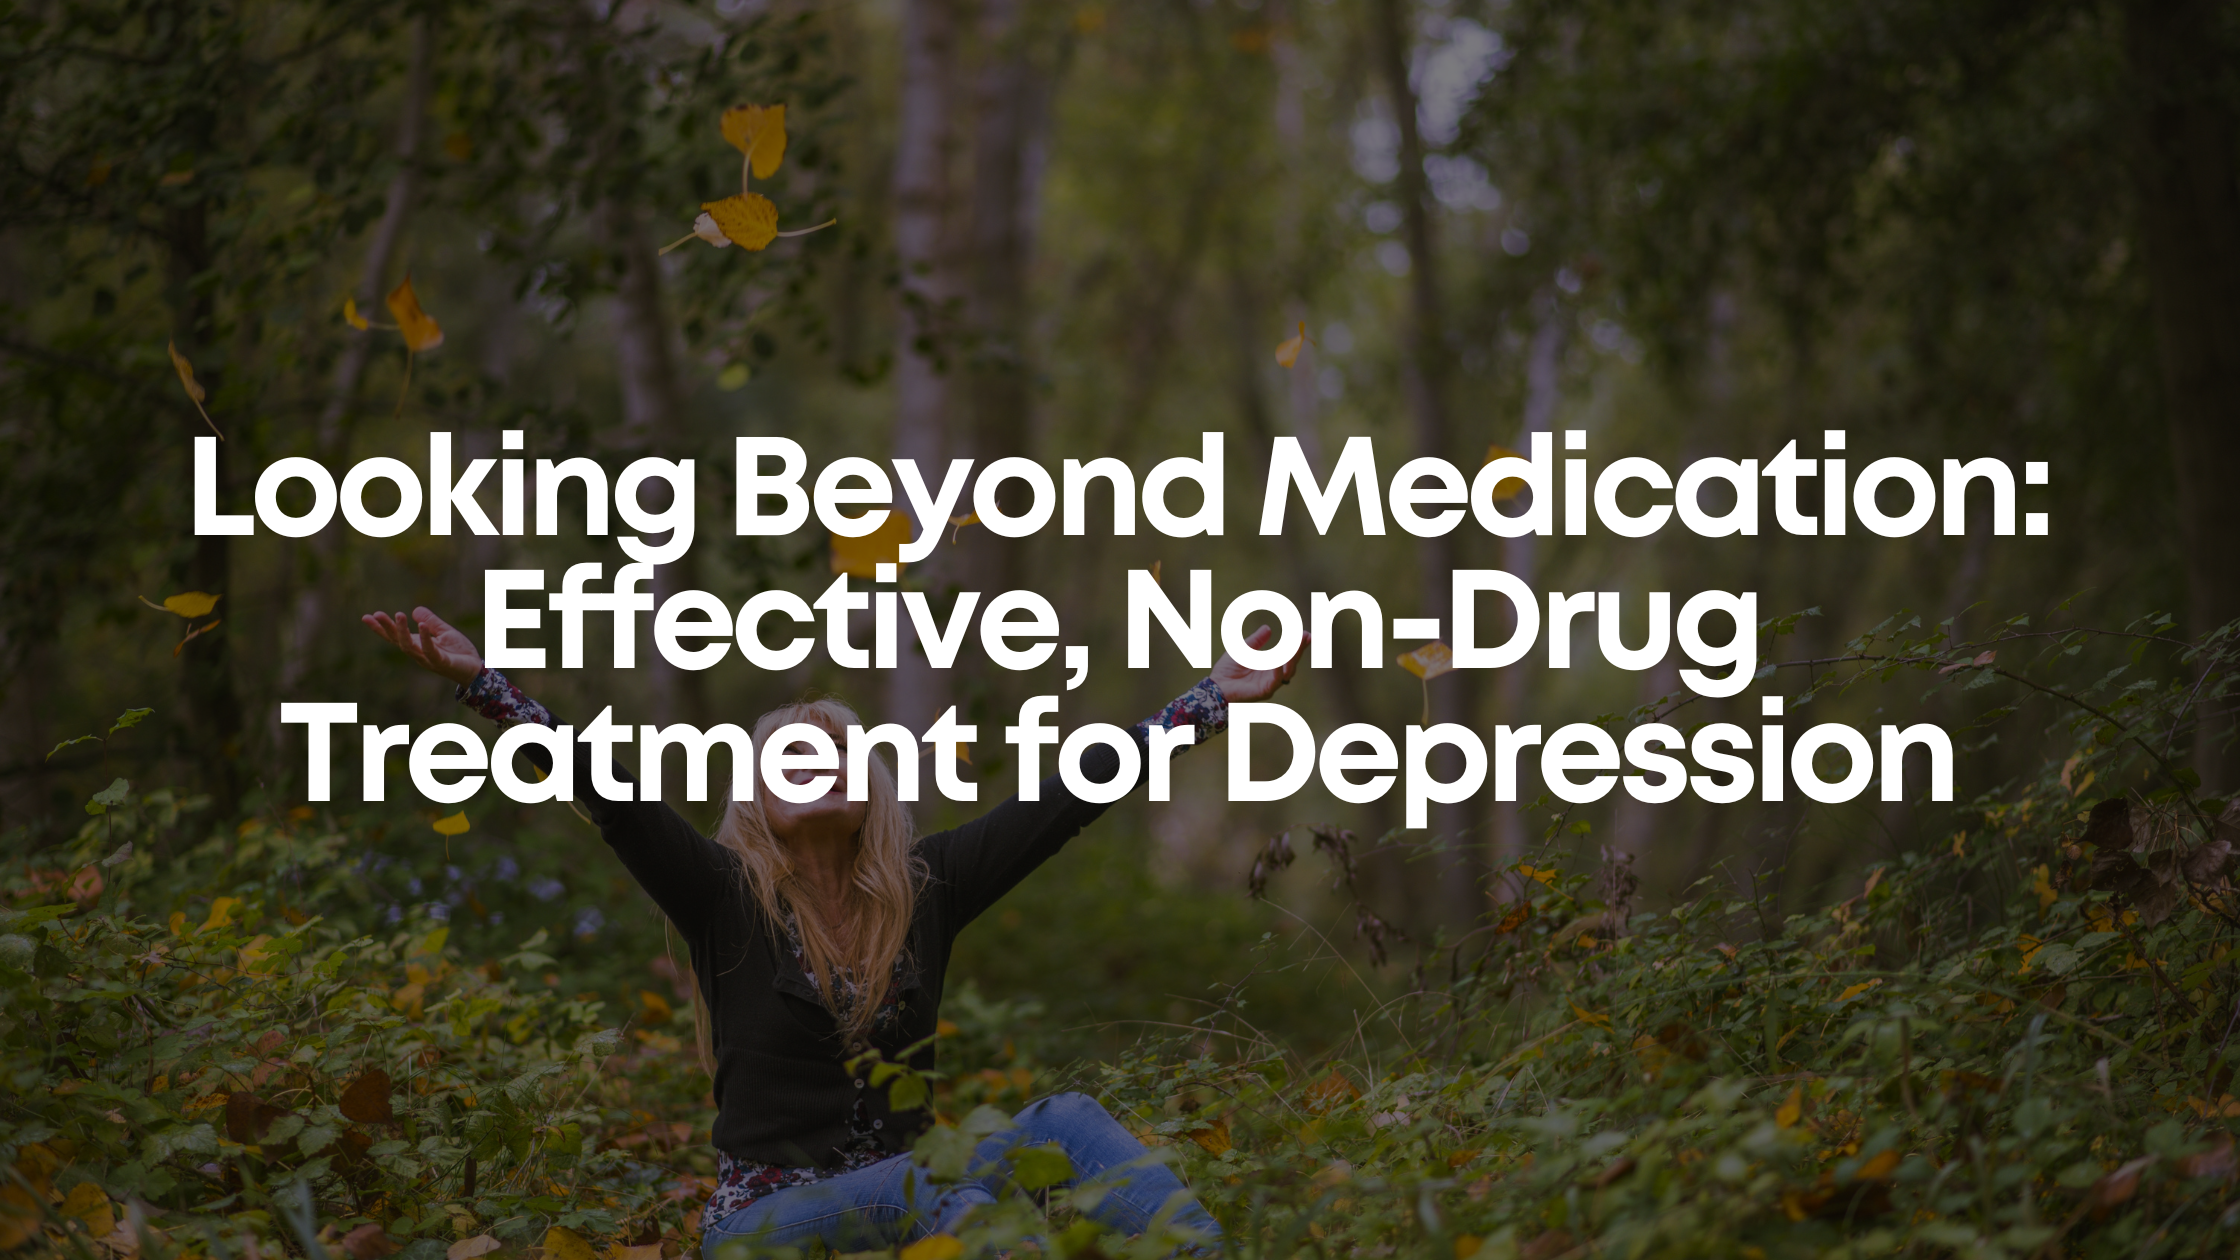 You are currently viewing Looking Beyond Medication: Effective, Non-Drug Treatment for Depression